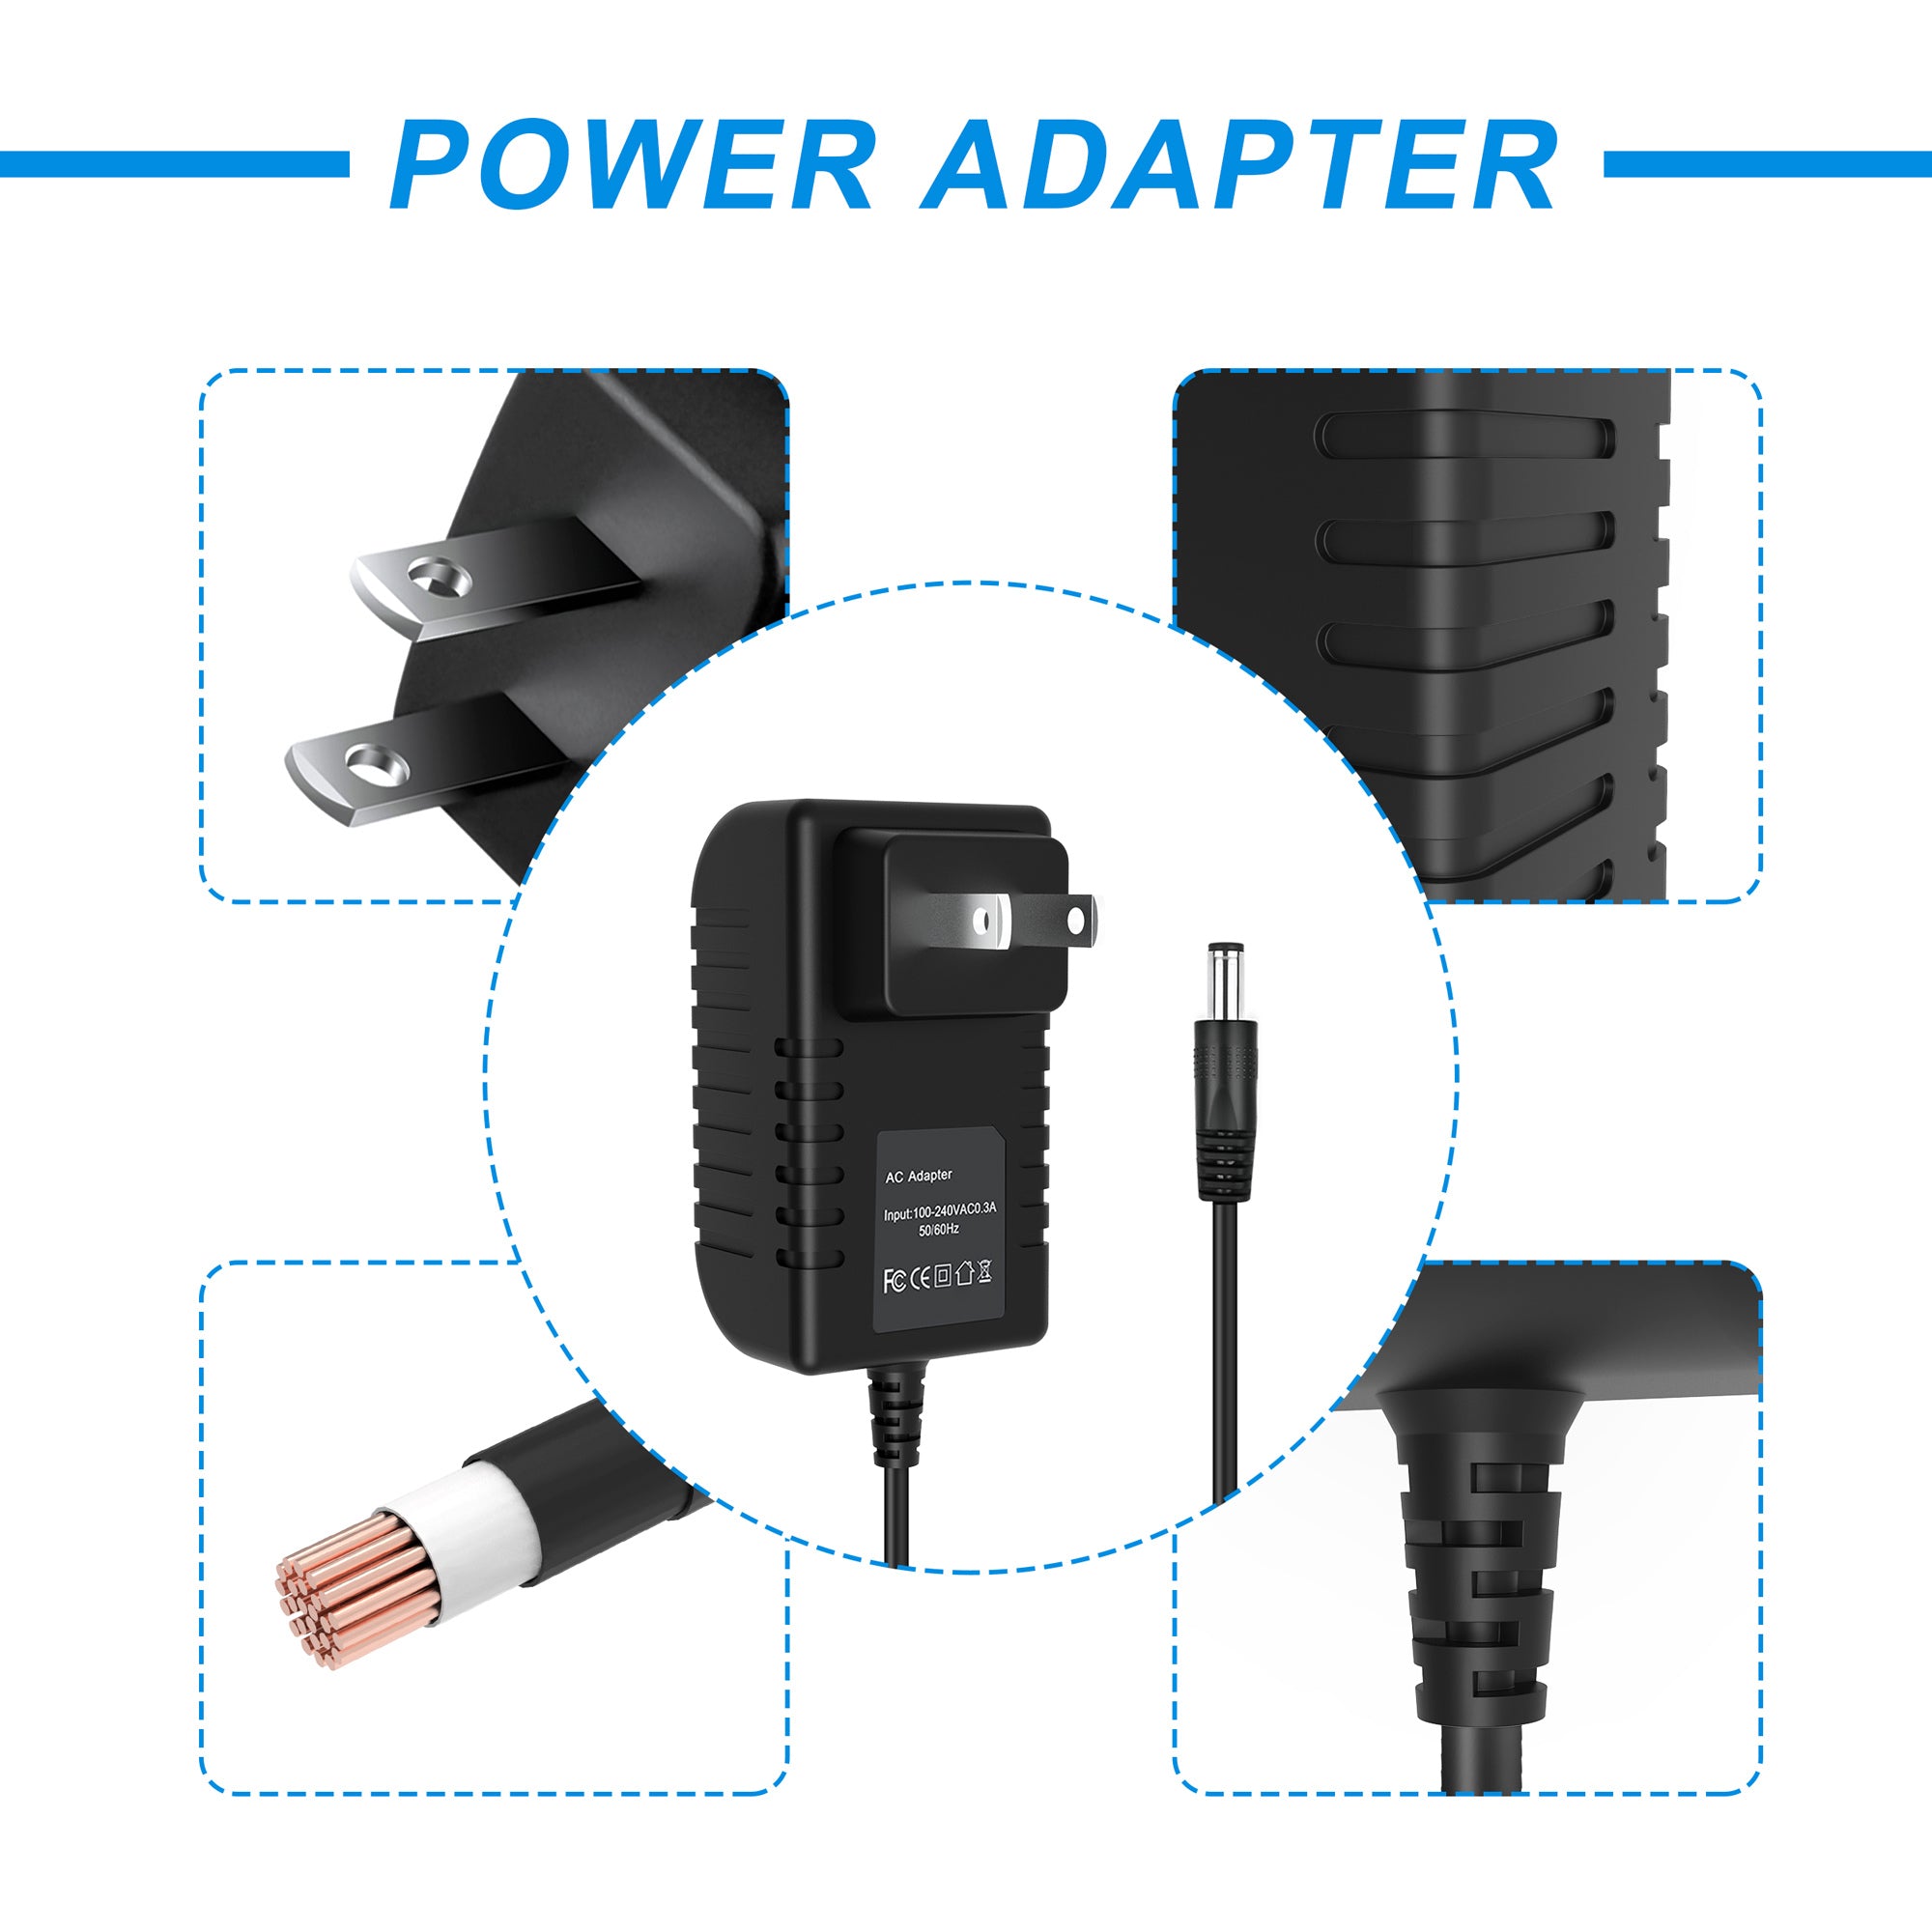 AbleGrid  5V AC/DC Adapter Compatible with iHome AS150-050-AC300 9IH529B 91H529B, SiliconDust HDHomeRun Prime Cable HDTV OTA 3-Tuner # HDHR3-CC 5VDC 3A DC5V 3.0A 5.0V Power Supply Cord Charger PSU